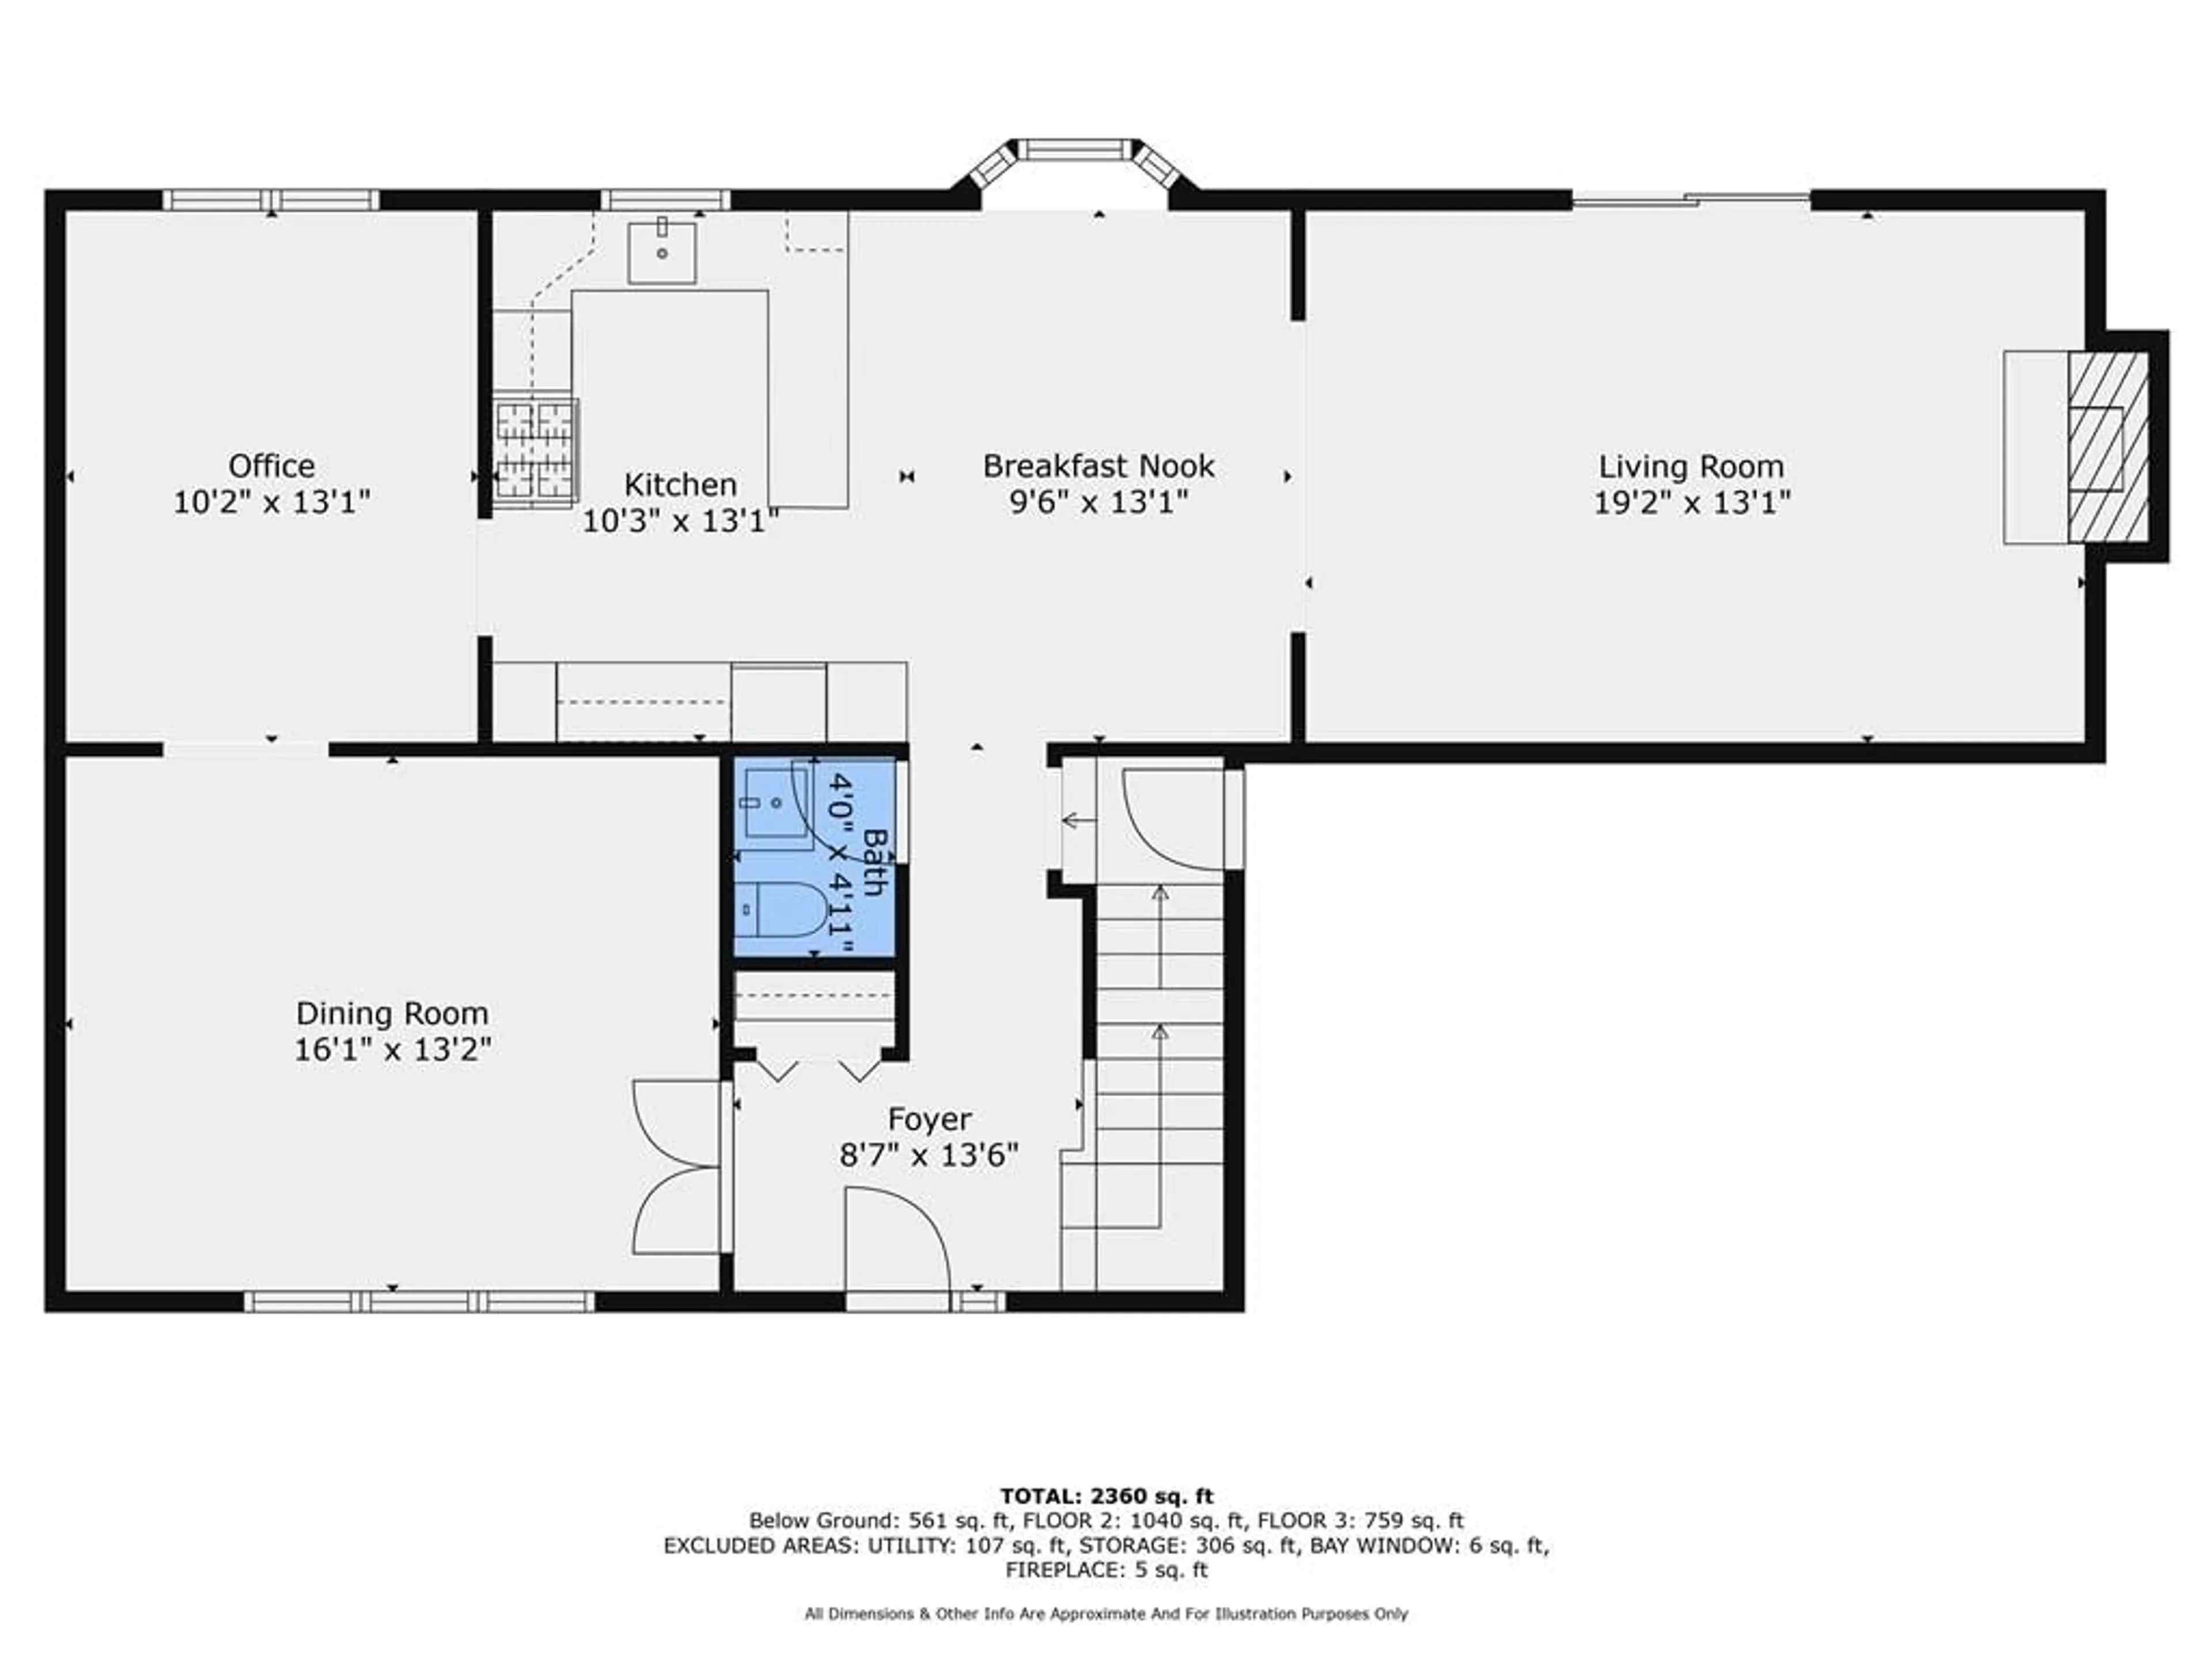 Floor plan for 10 EVELYN St, Almonte Ontario K0A 1A0